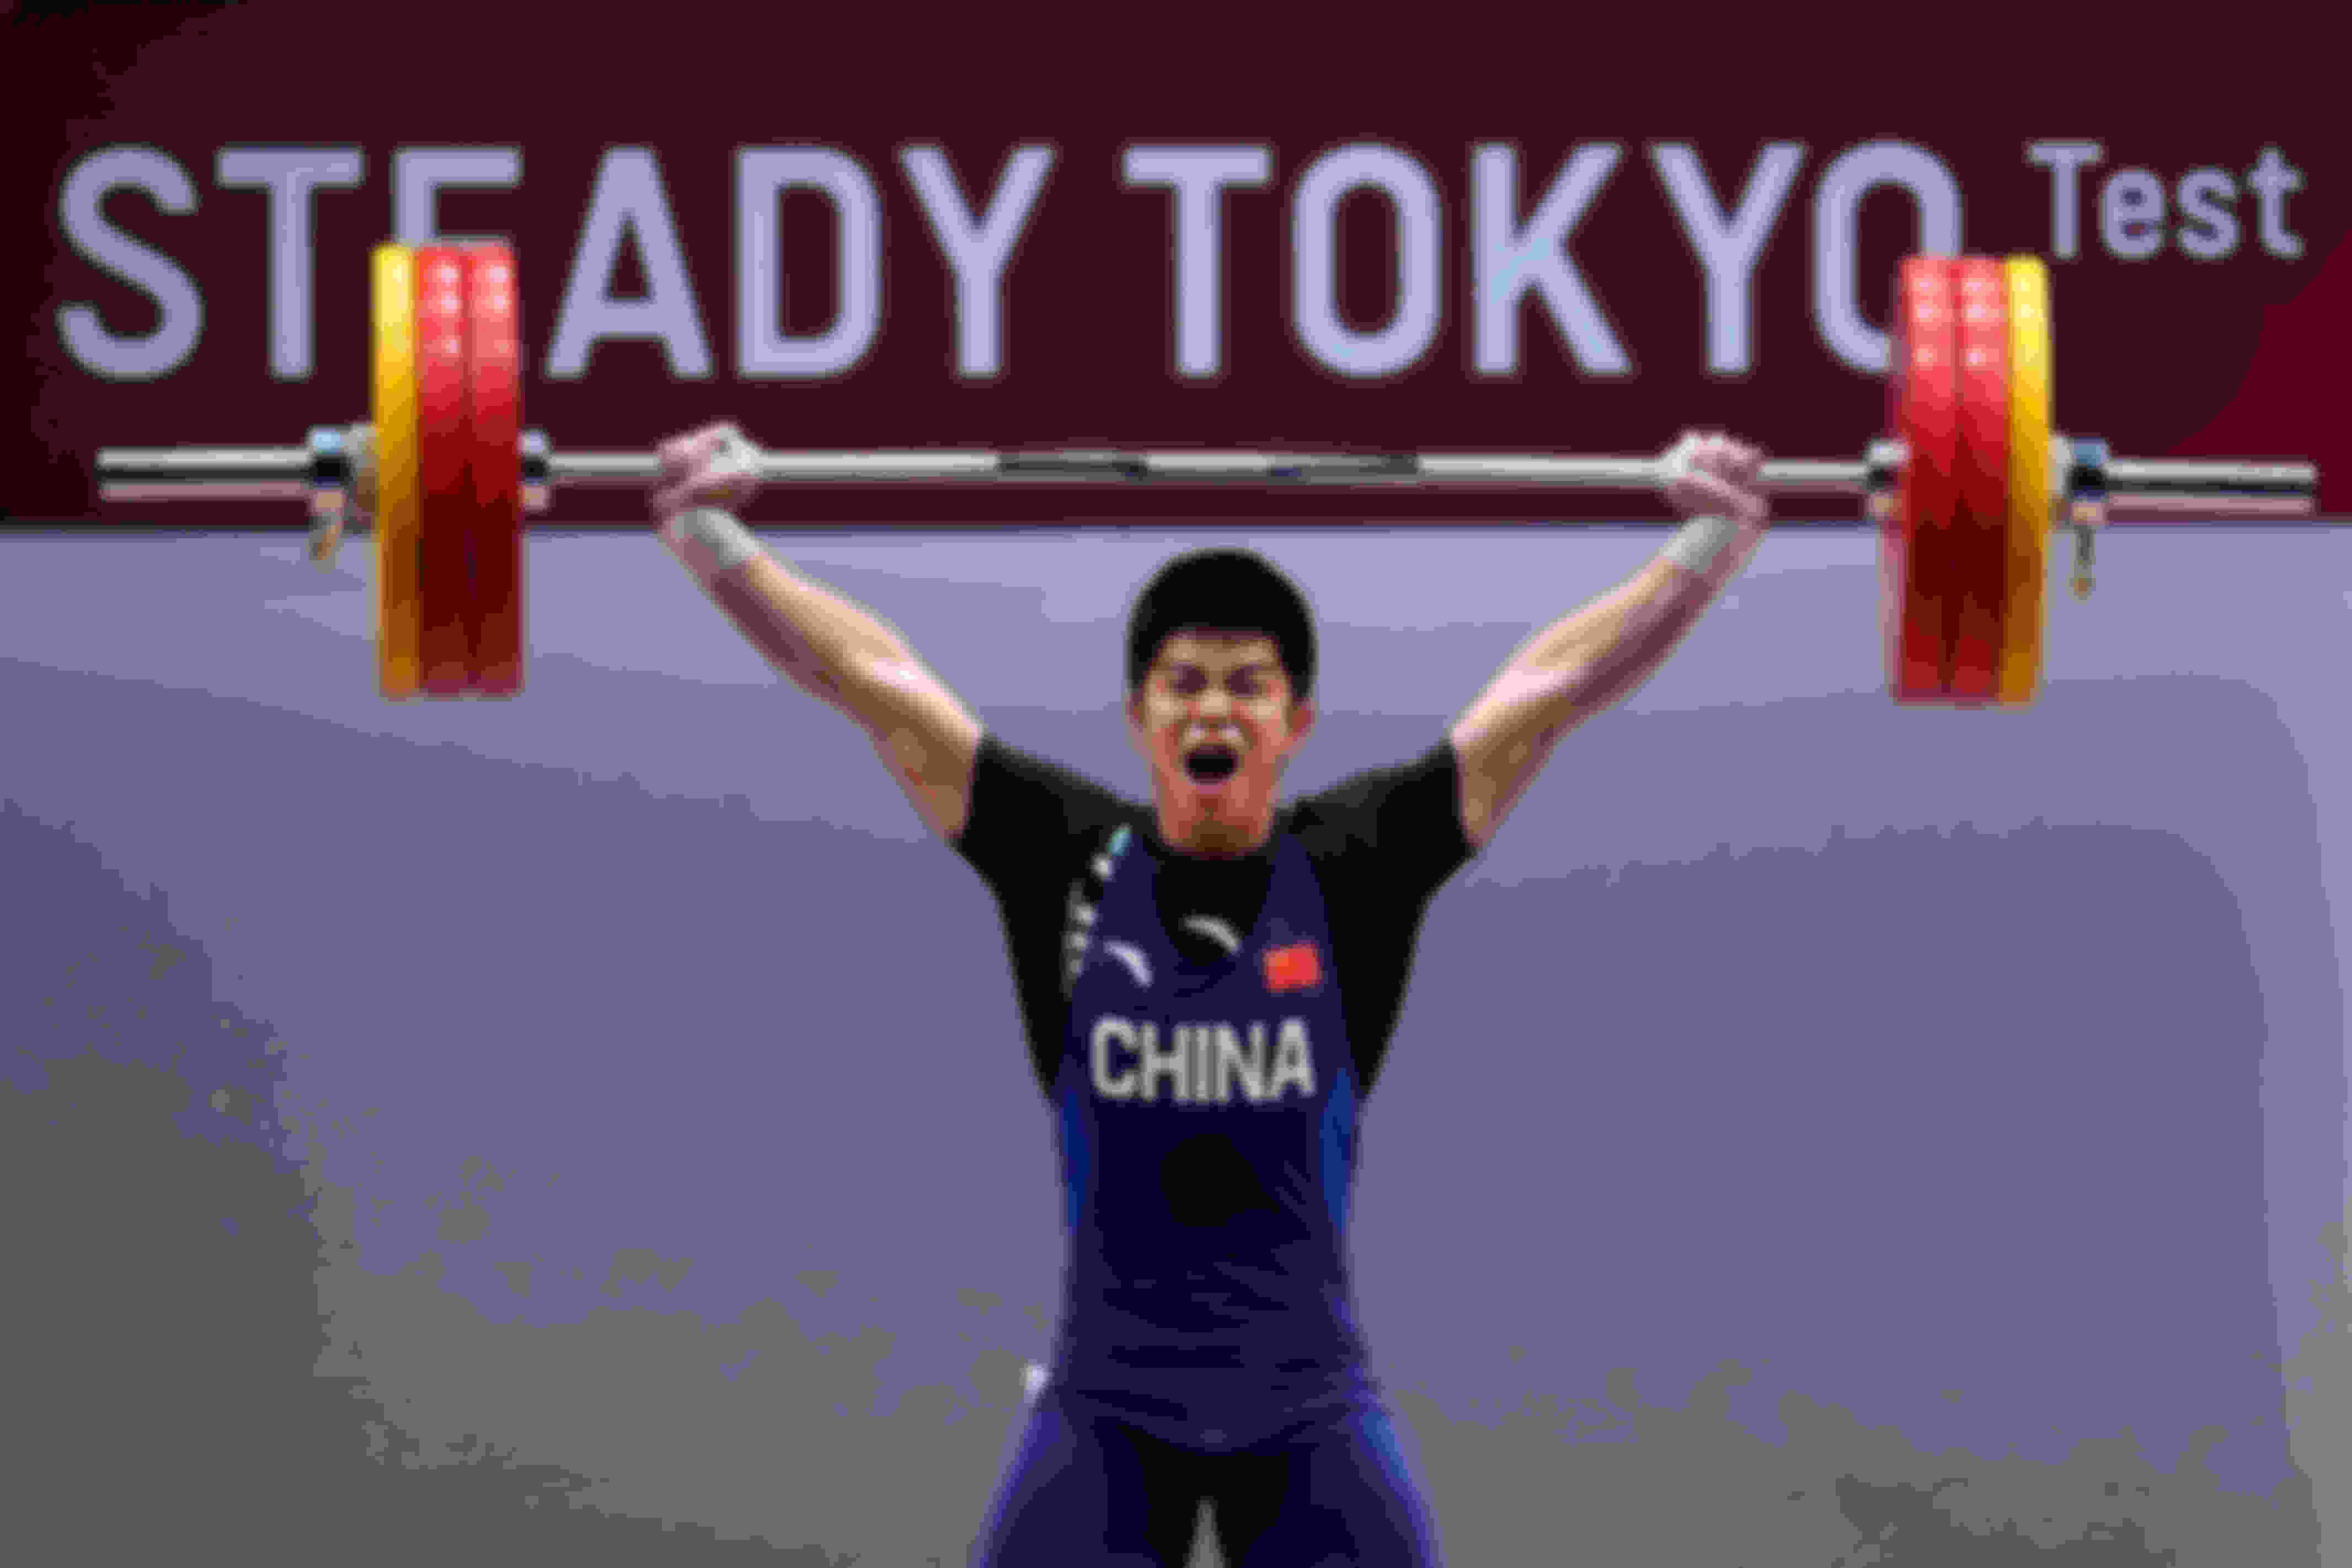 Huang Minhao sets a new snatch world record at the Tokyo 2020 test event on 6 July 2019